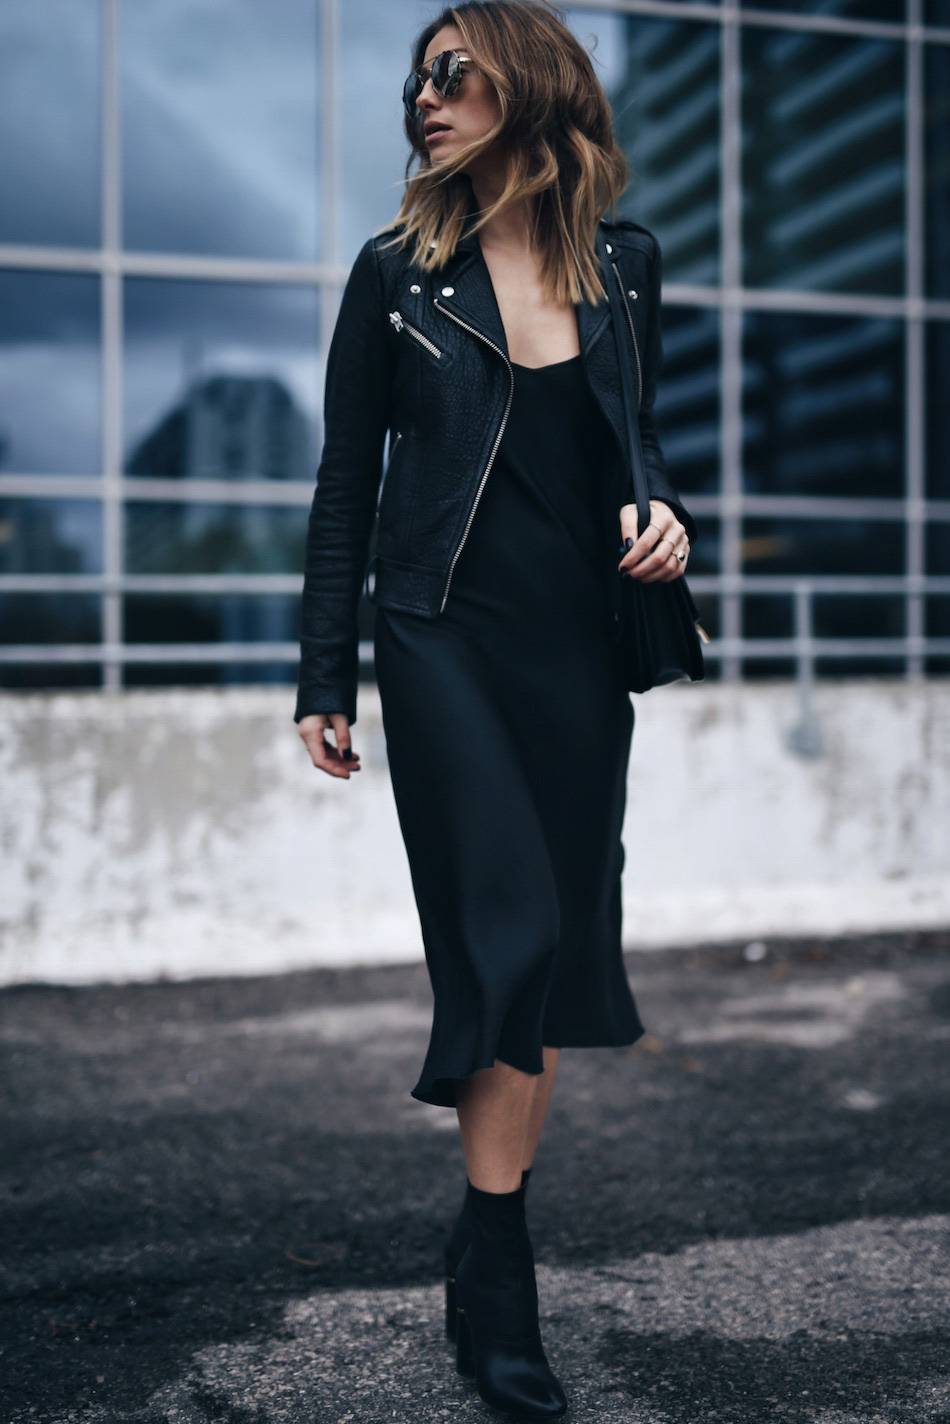 style-and-beauty-blogger-jill-lansky-of-the-august-diaries-in-a-mackage-rumer-leather-jacket-slip-dress-celine-bag-and-3-1-phillip-lim-kyoto-boots